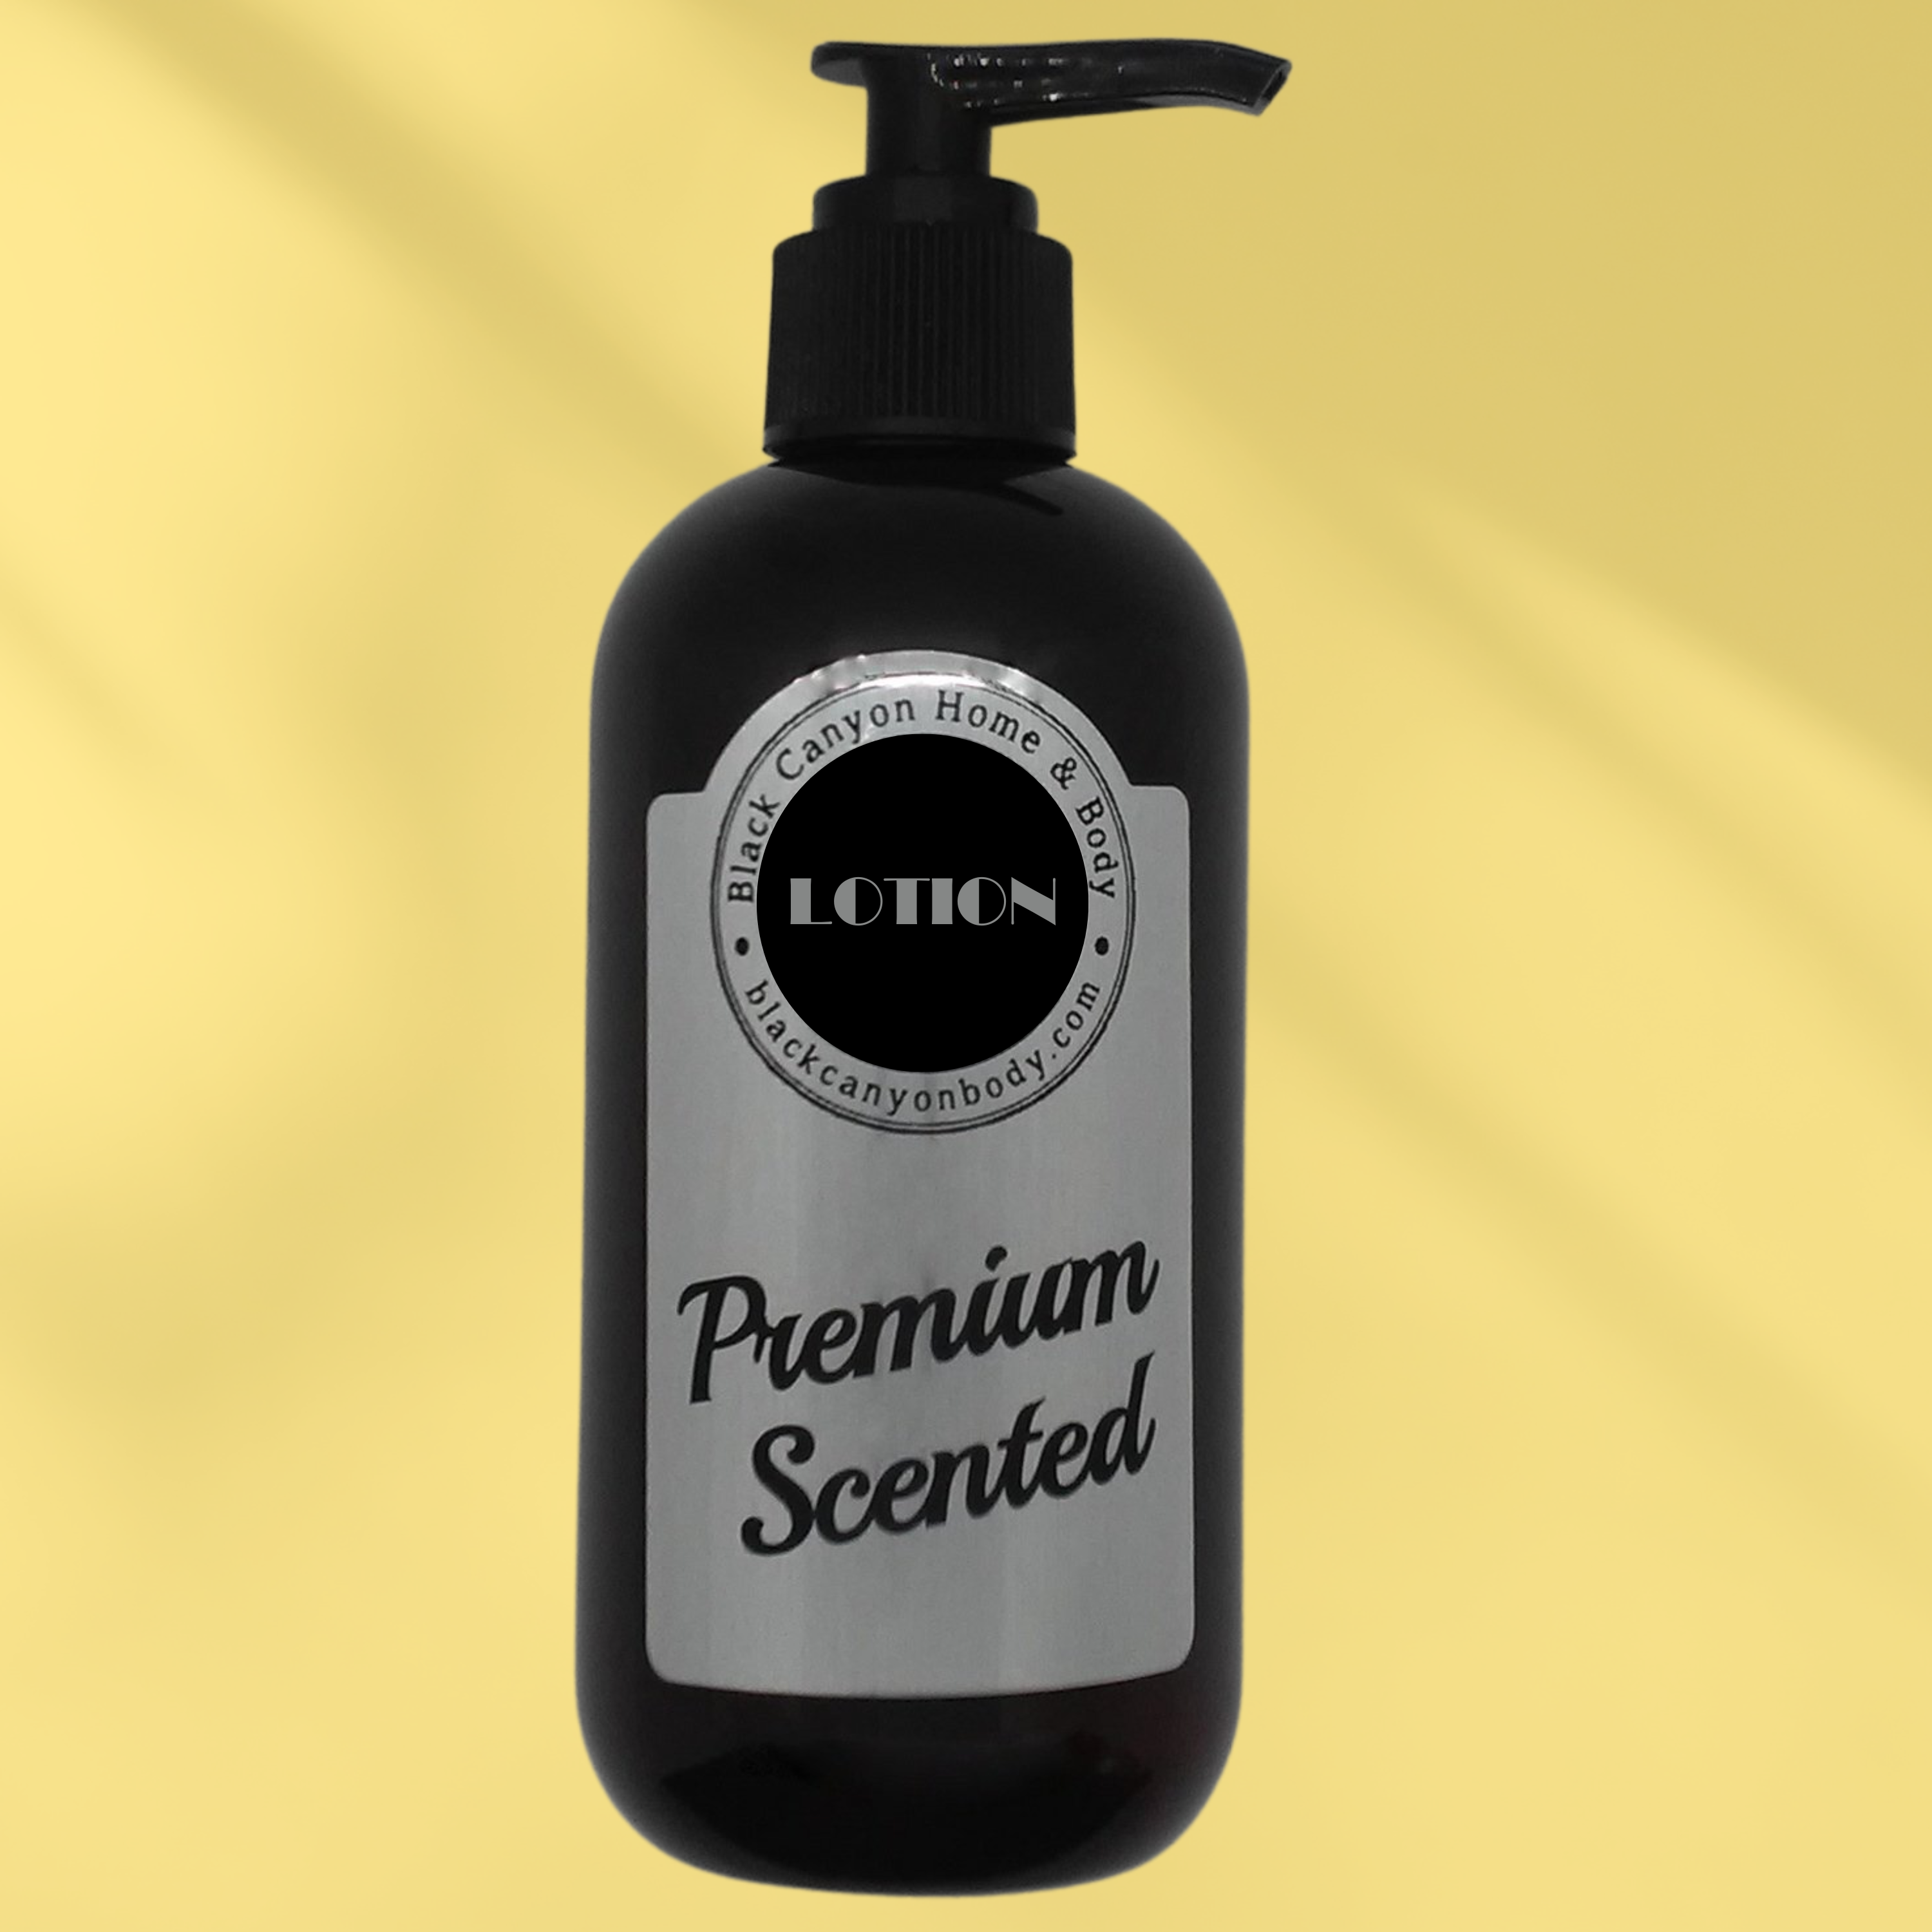 Paydens Cobalt Cedarwood Smoke Scented Luxury Body Lotion with Lanolin and Jojoba Oil For Men